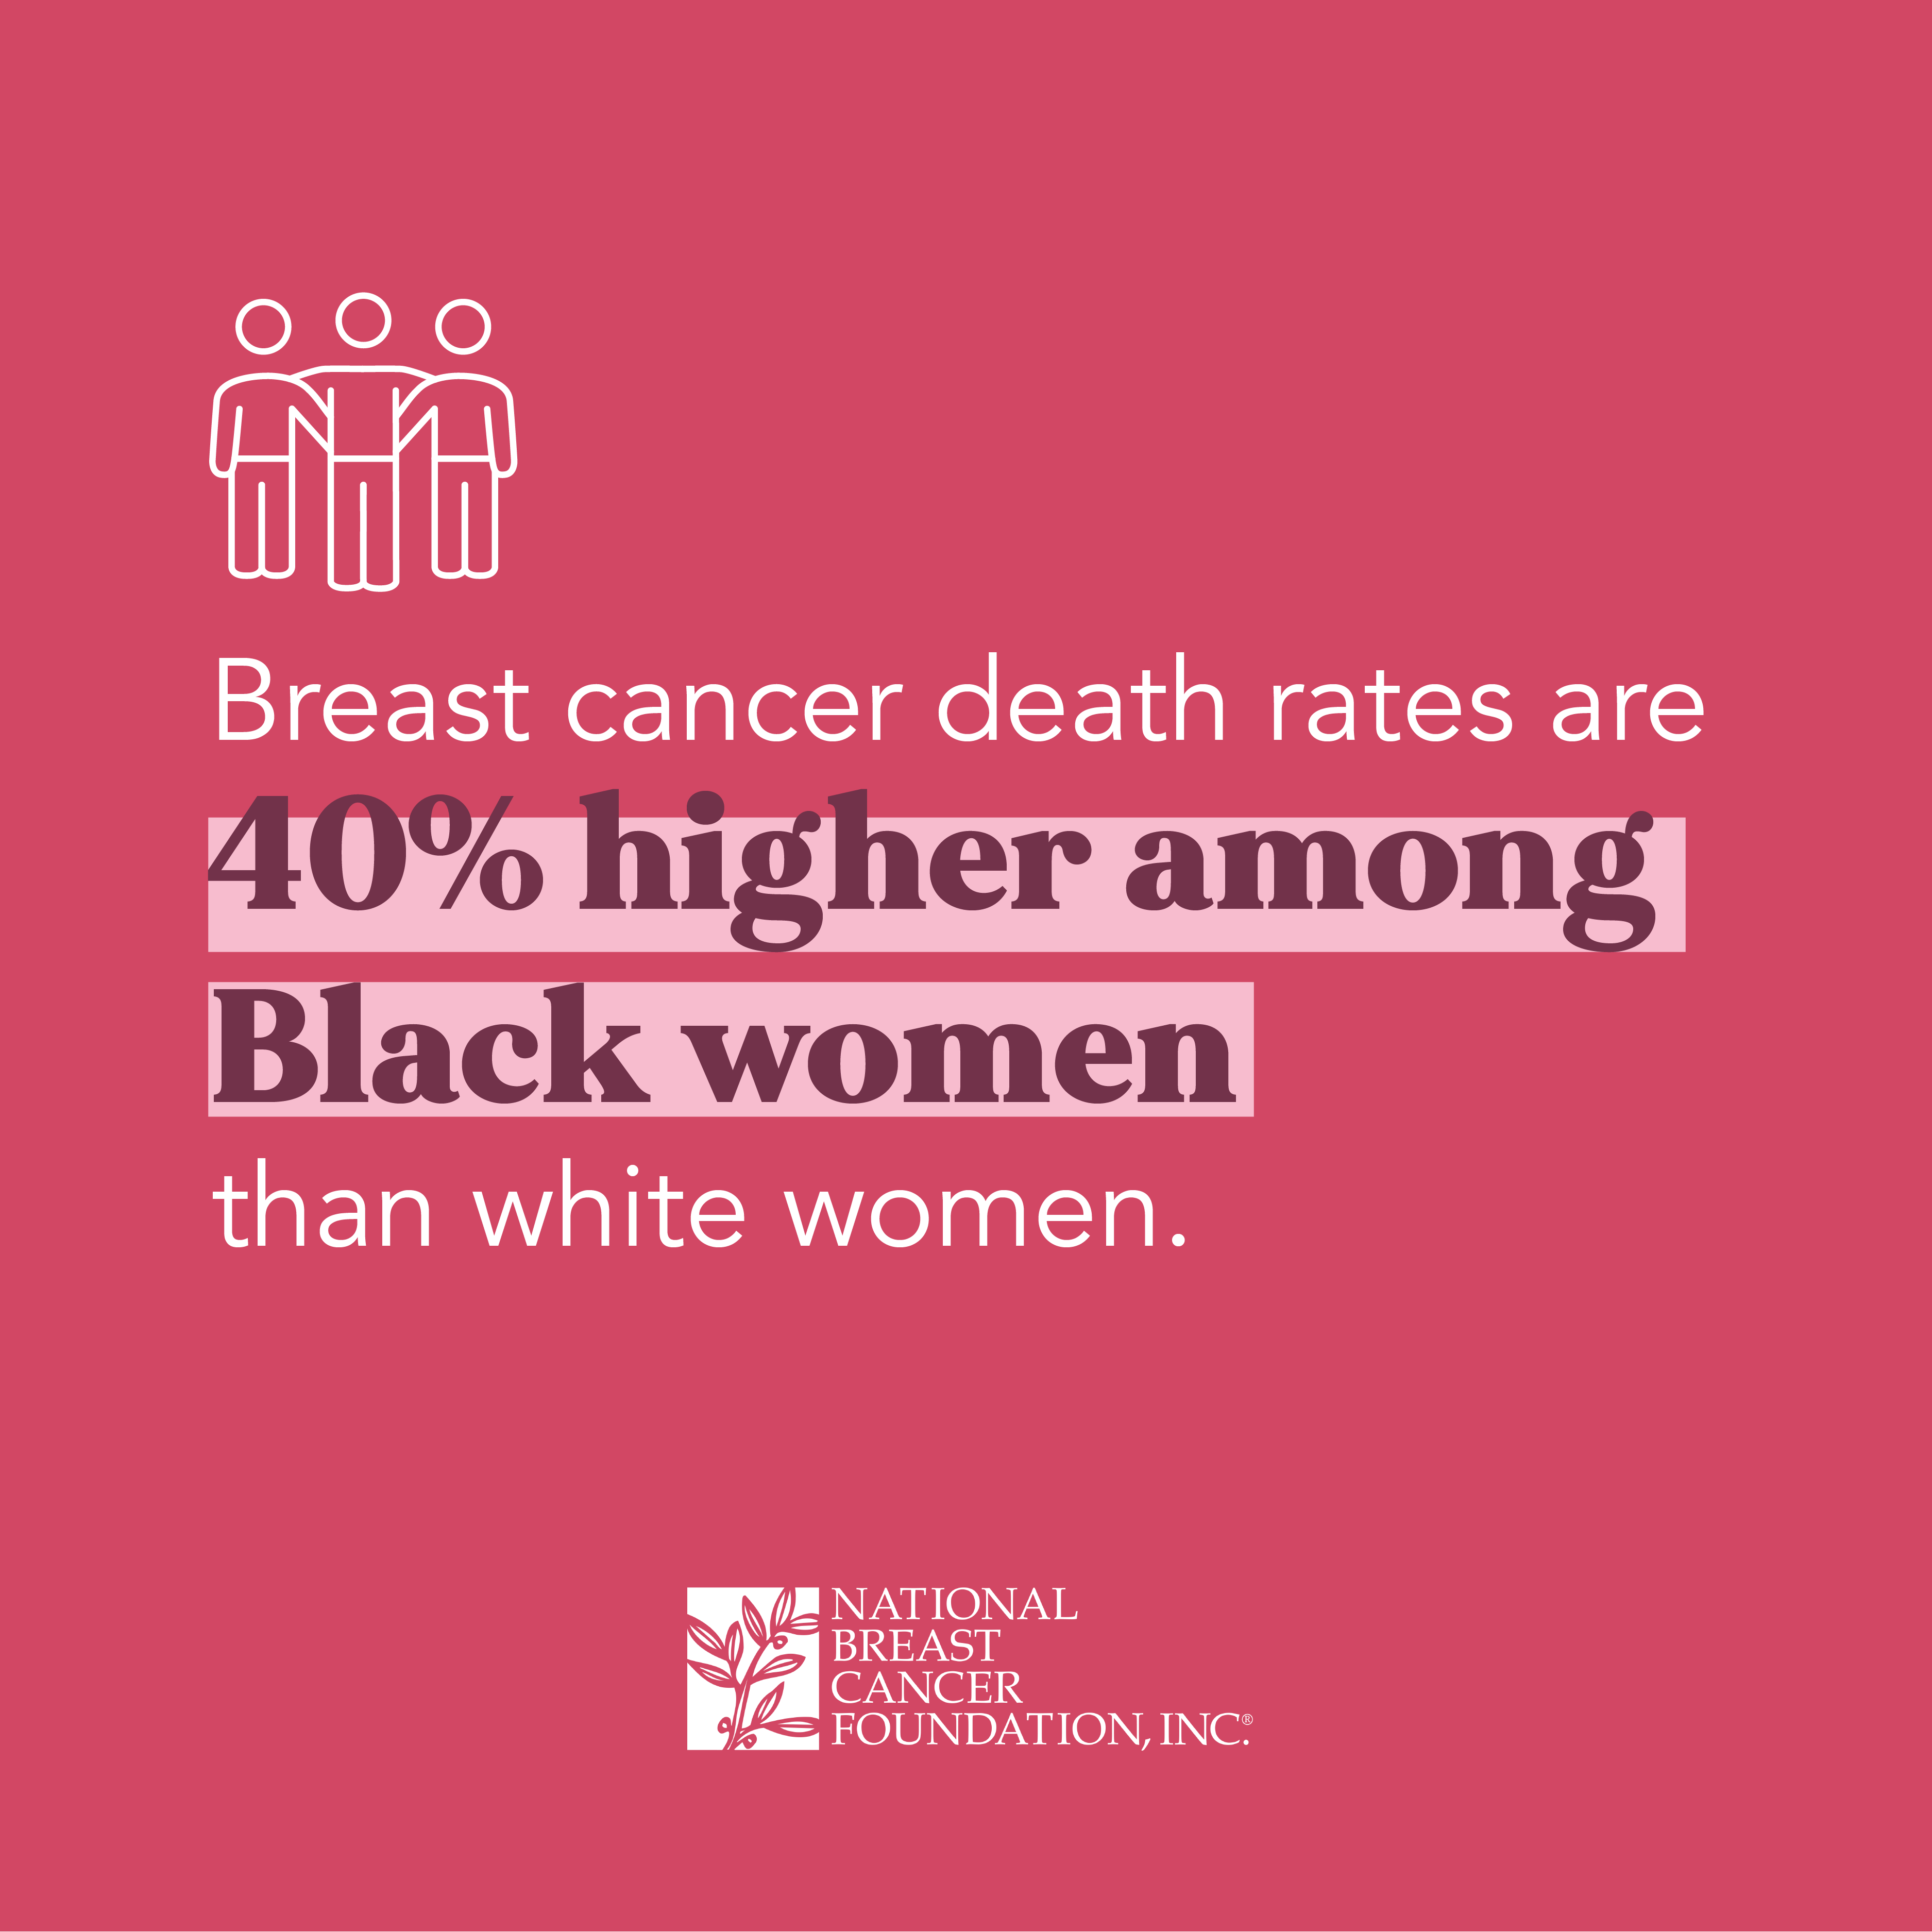 Breast Cancer death rates are 40 percent higher among black women than white women